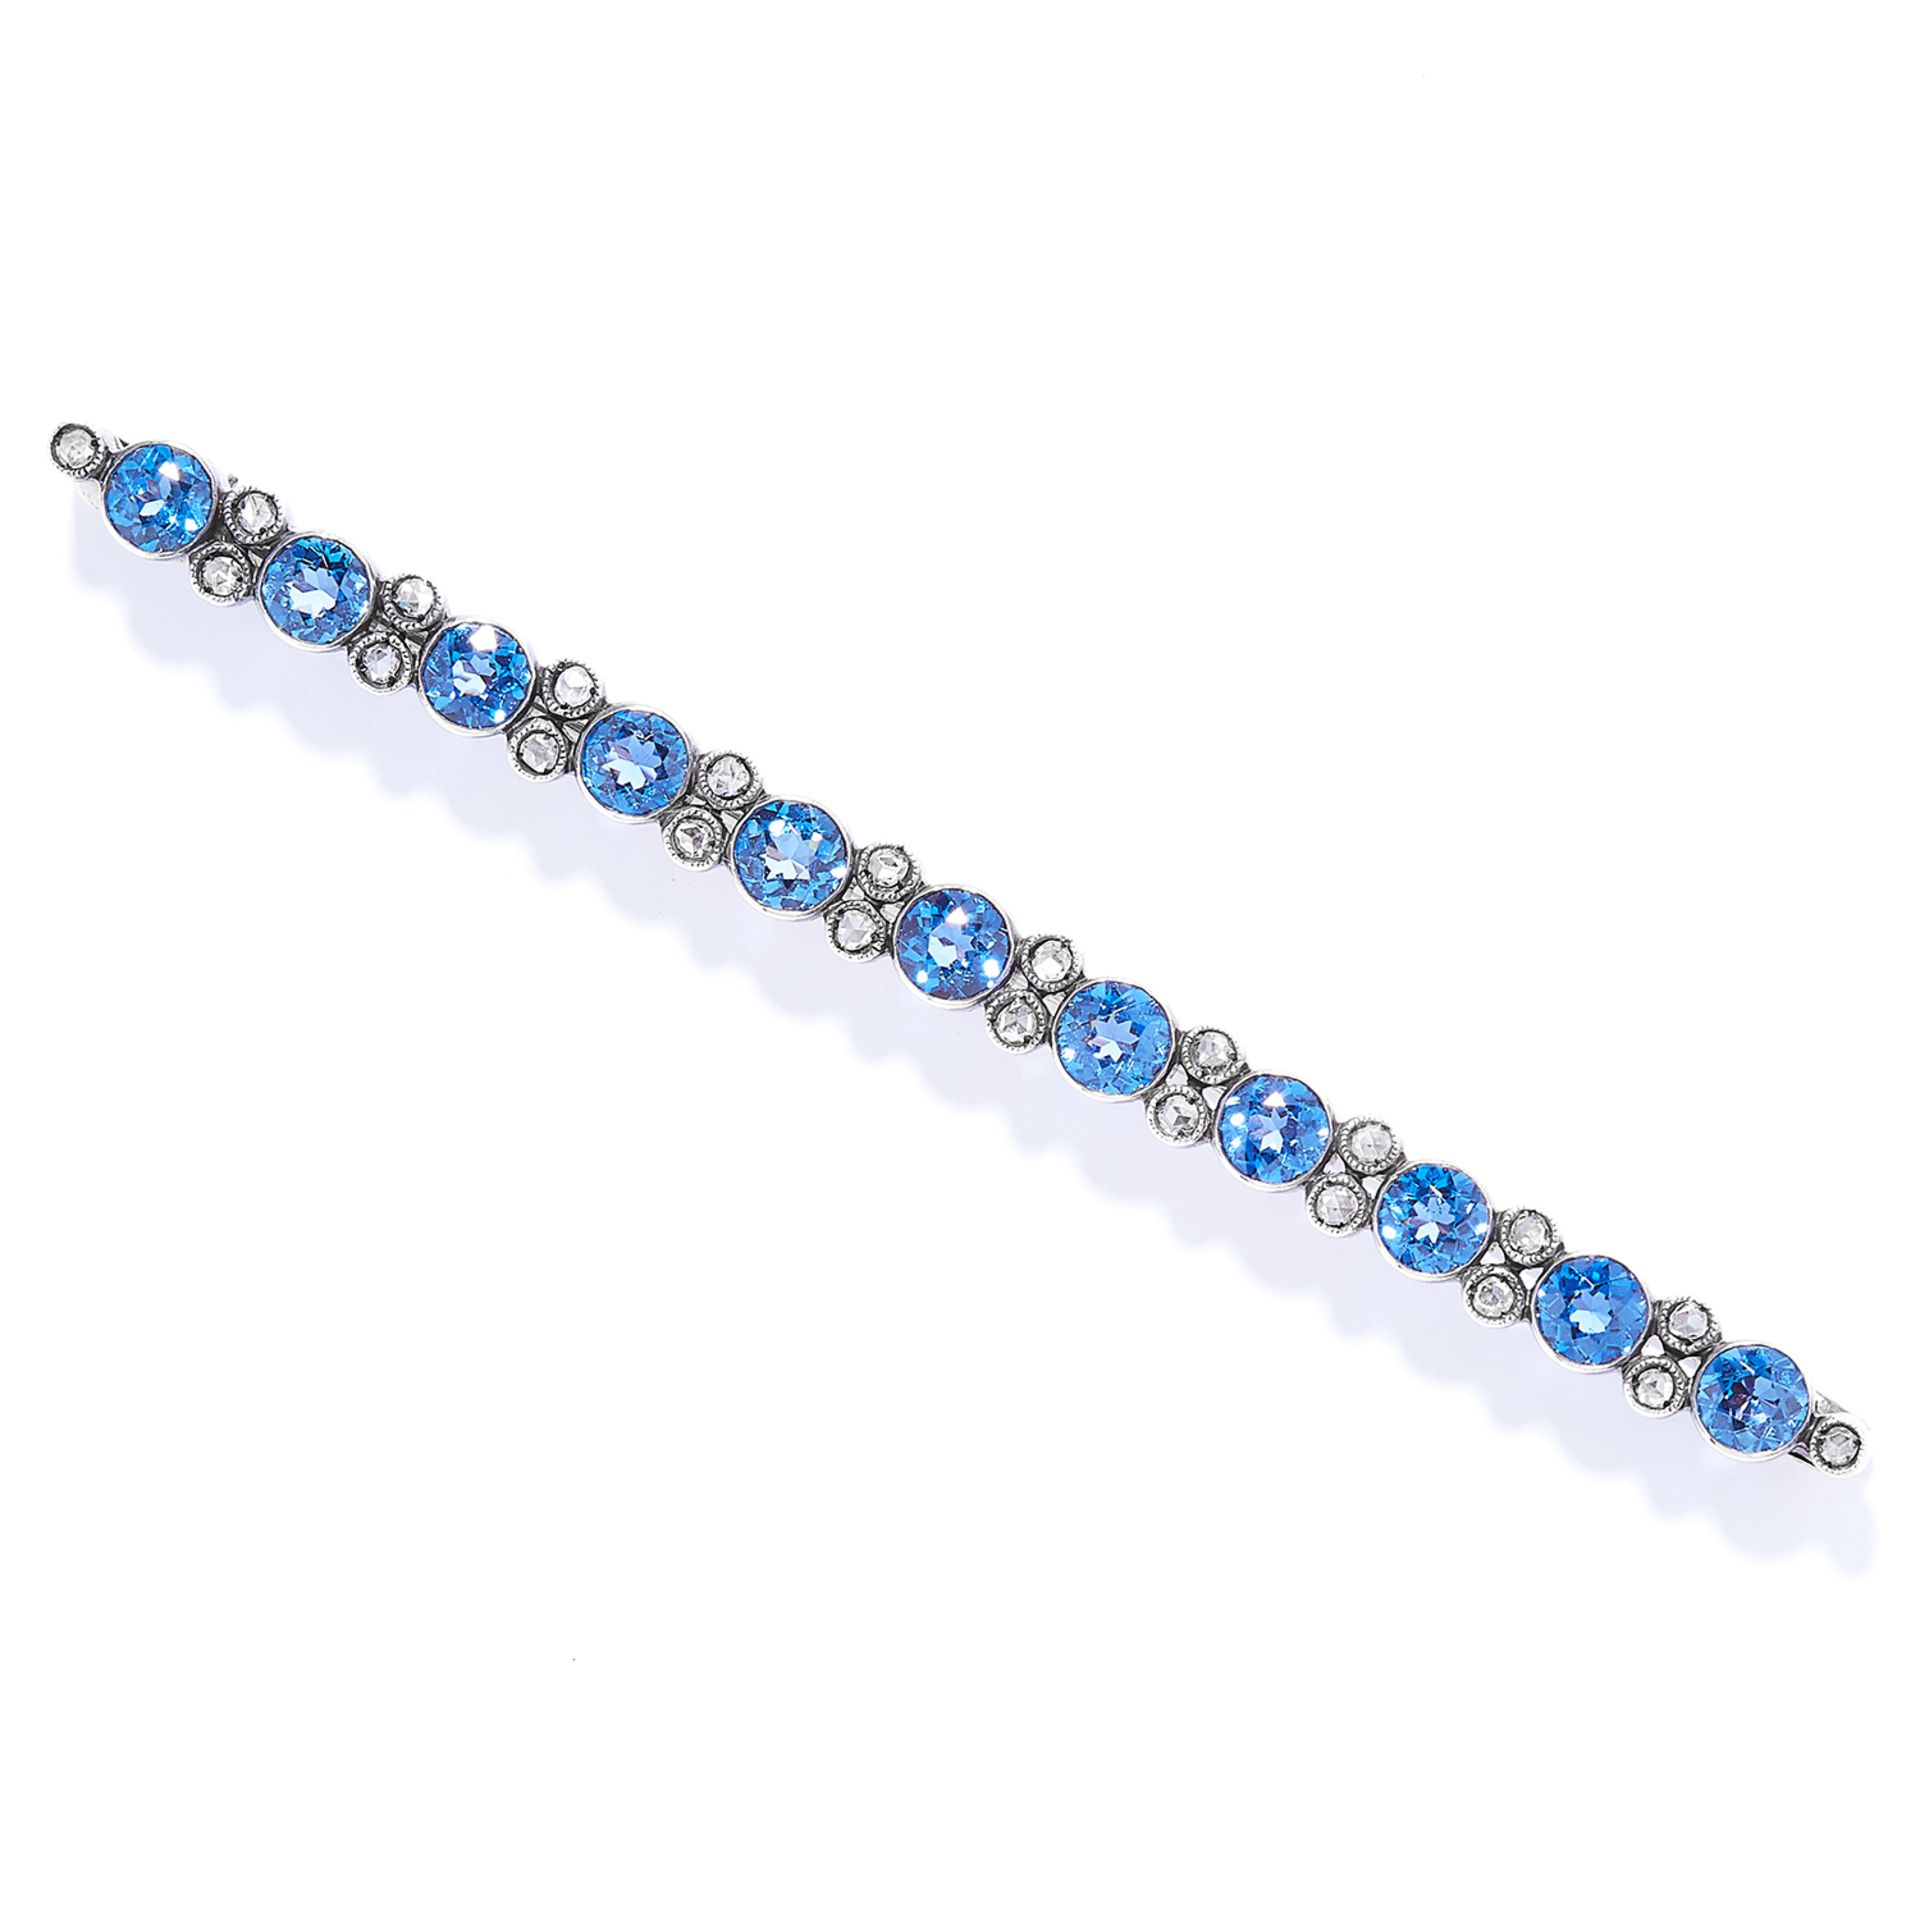 ANTIQUE 4.50 CARAT SAPPHIRE AND DIAMOND BAR BROOCH in gold, set with round cut sapphires totalling